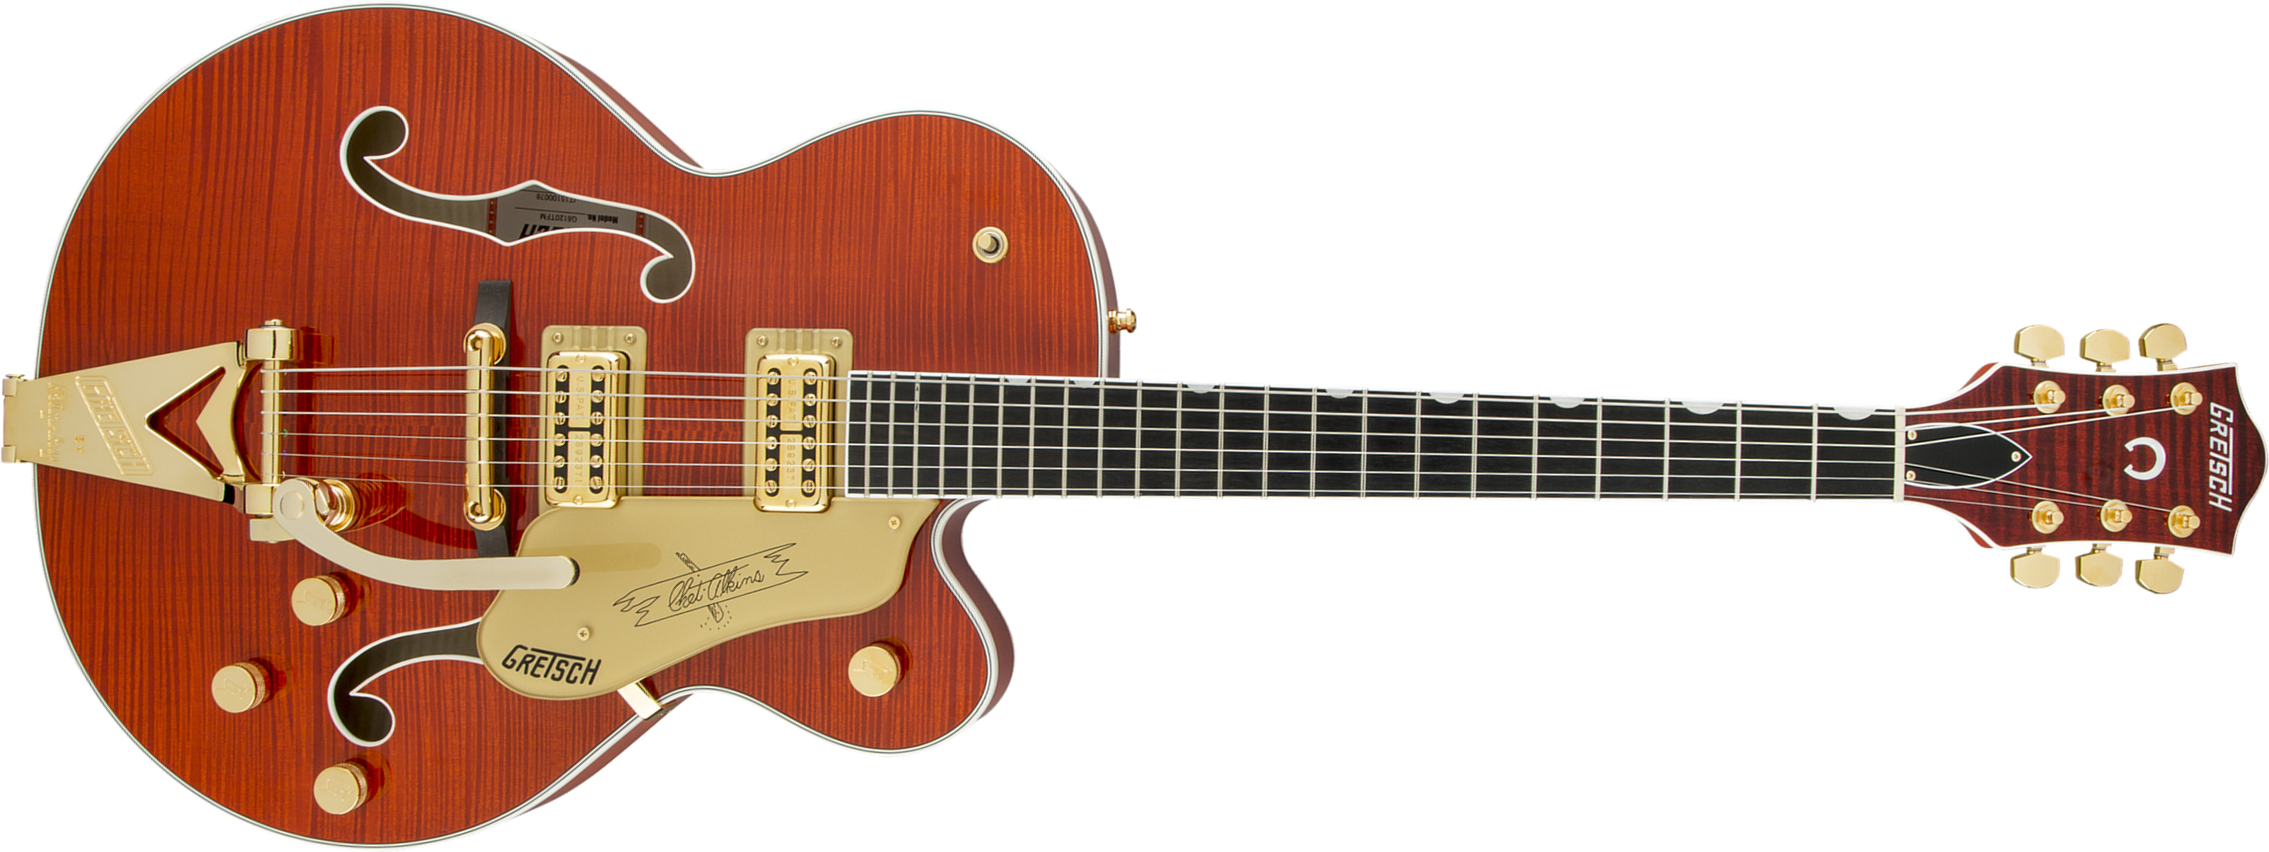 Gretsch G6120tfm Players Edition Nashville Pro Jap Bigsby Eb - Orange Stain - Semi-hollow electric guitar - Main picture